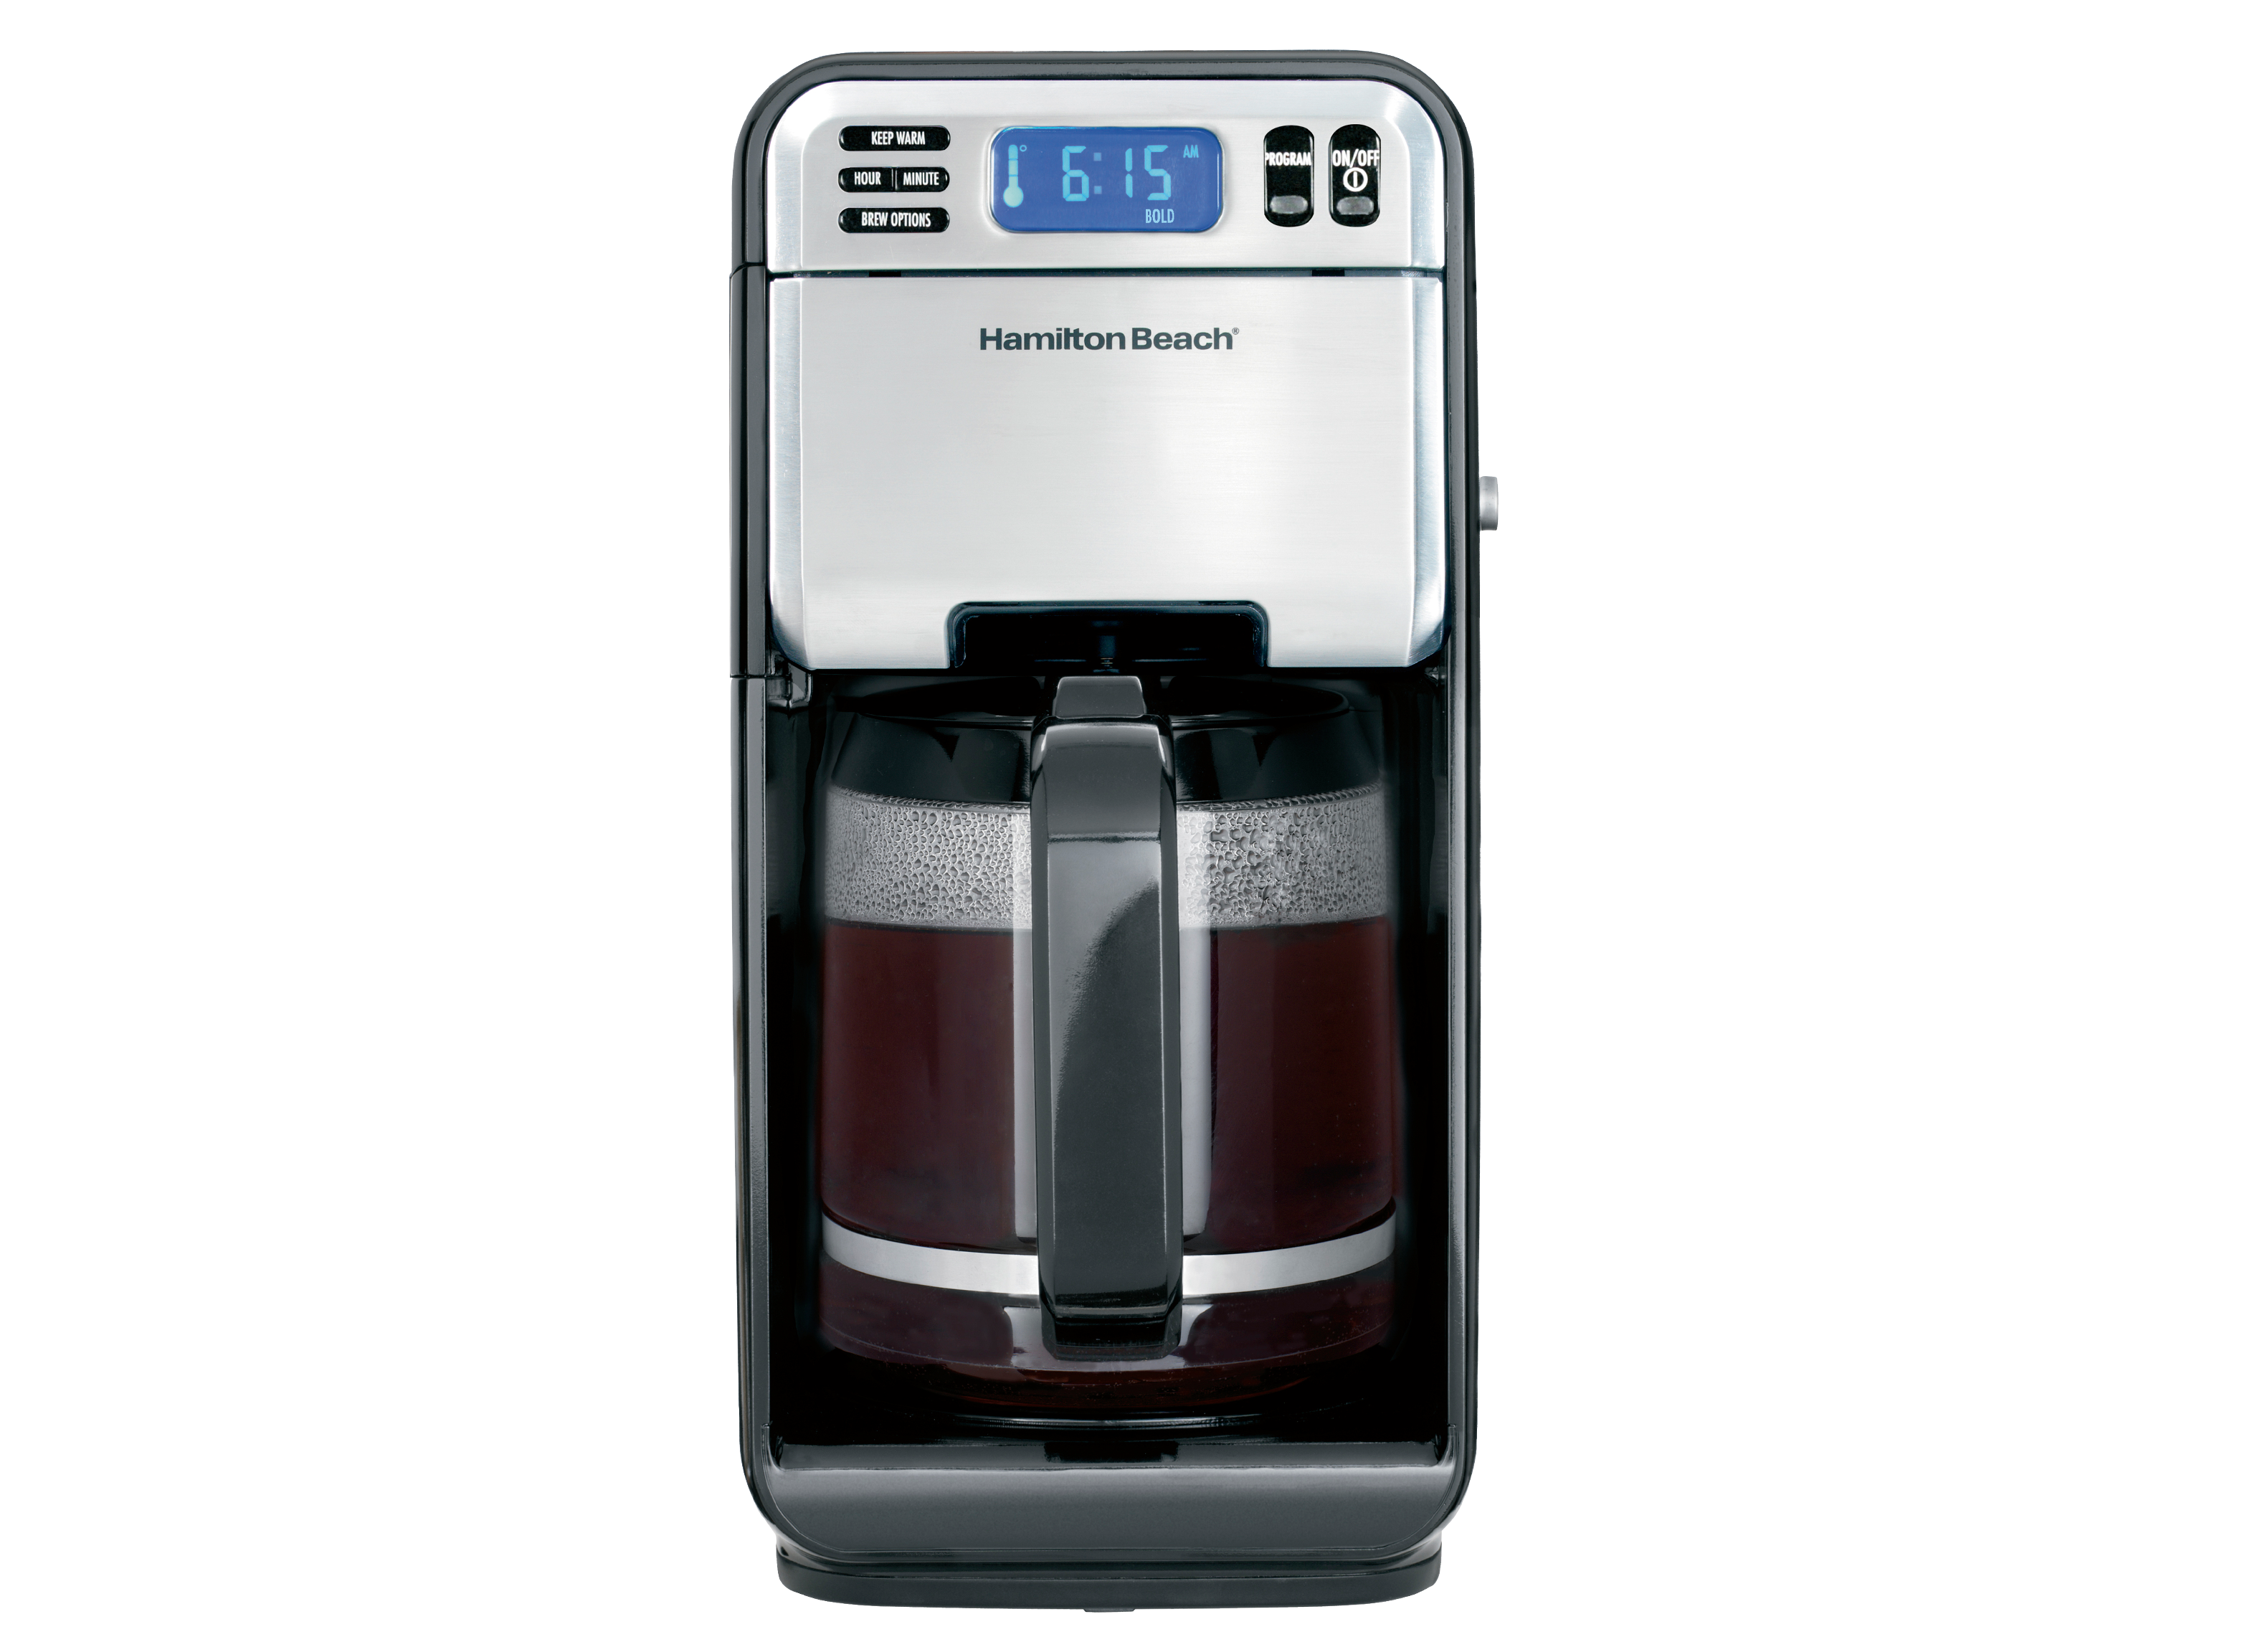 https://crdms.images.consumerreports.org/prod/products/cr/models/402116-drip-coffee-makers-with-carafe-hamilton-beach-programmable-46205-10015713.png